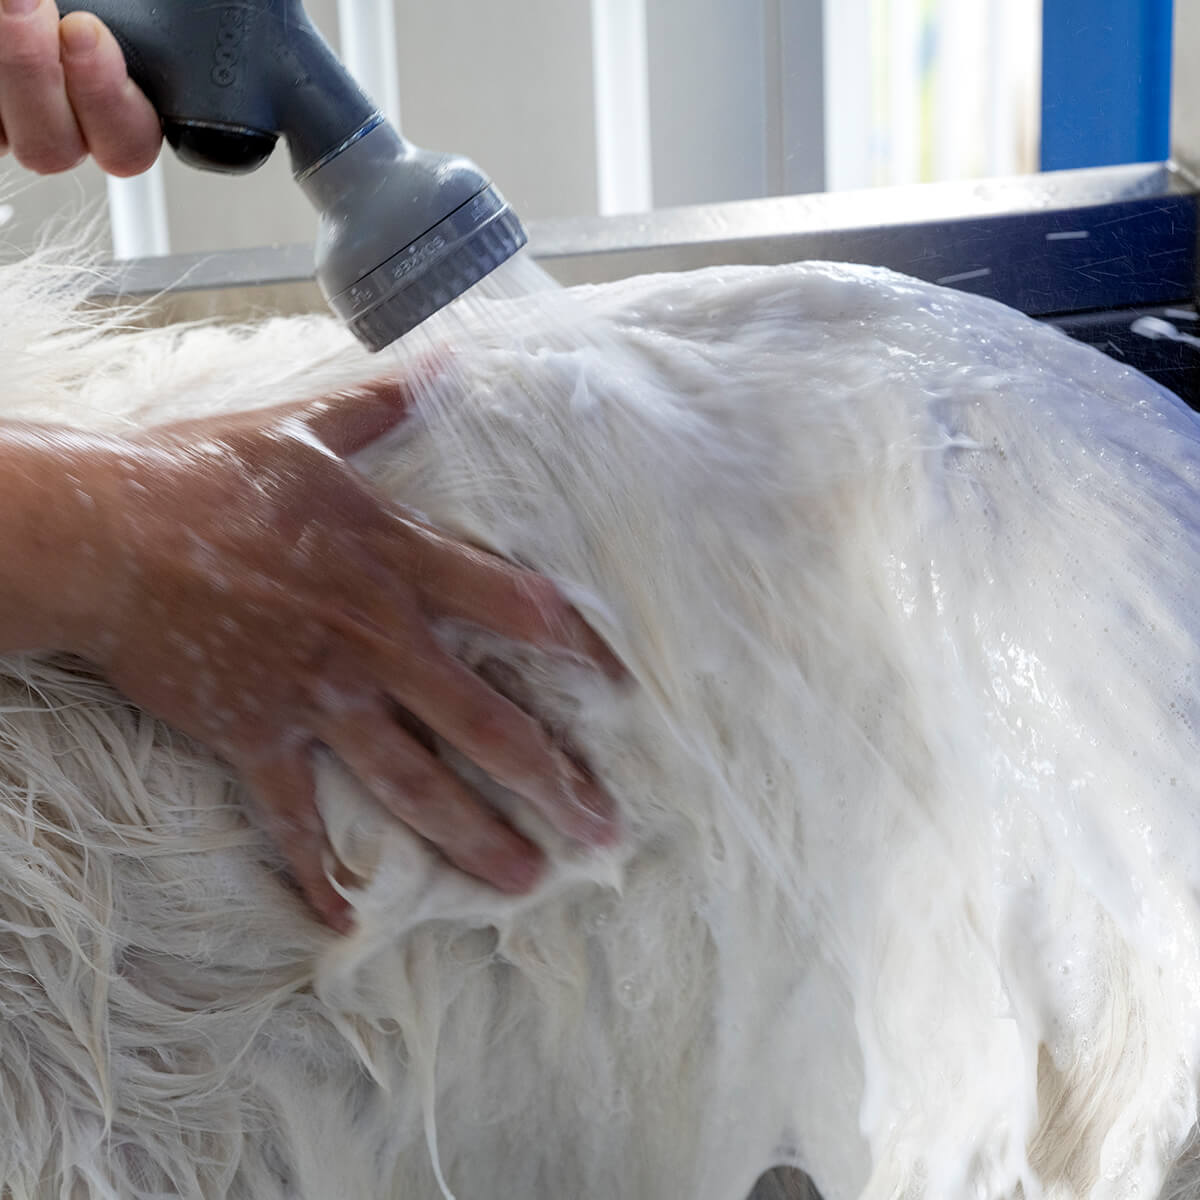 HappyDogWash - OTR now offers a new convenient and fast alternative way to wash your best friend